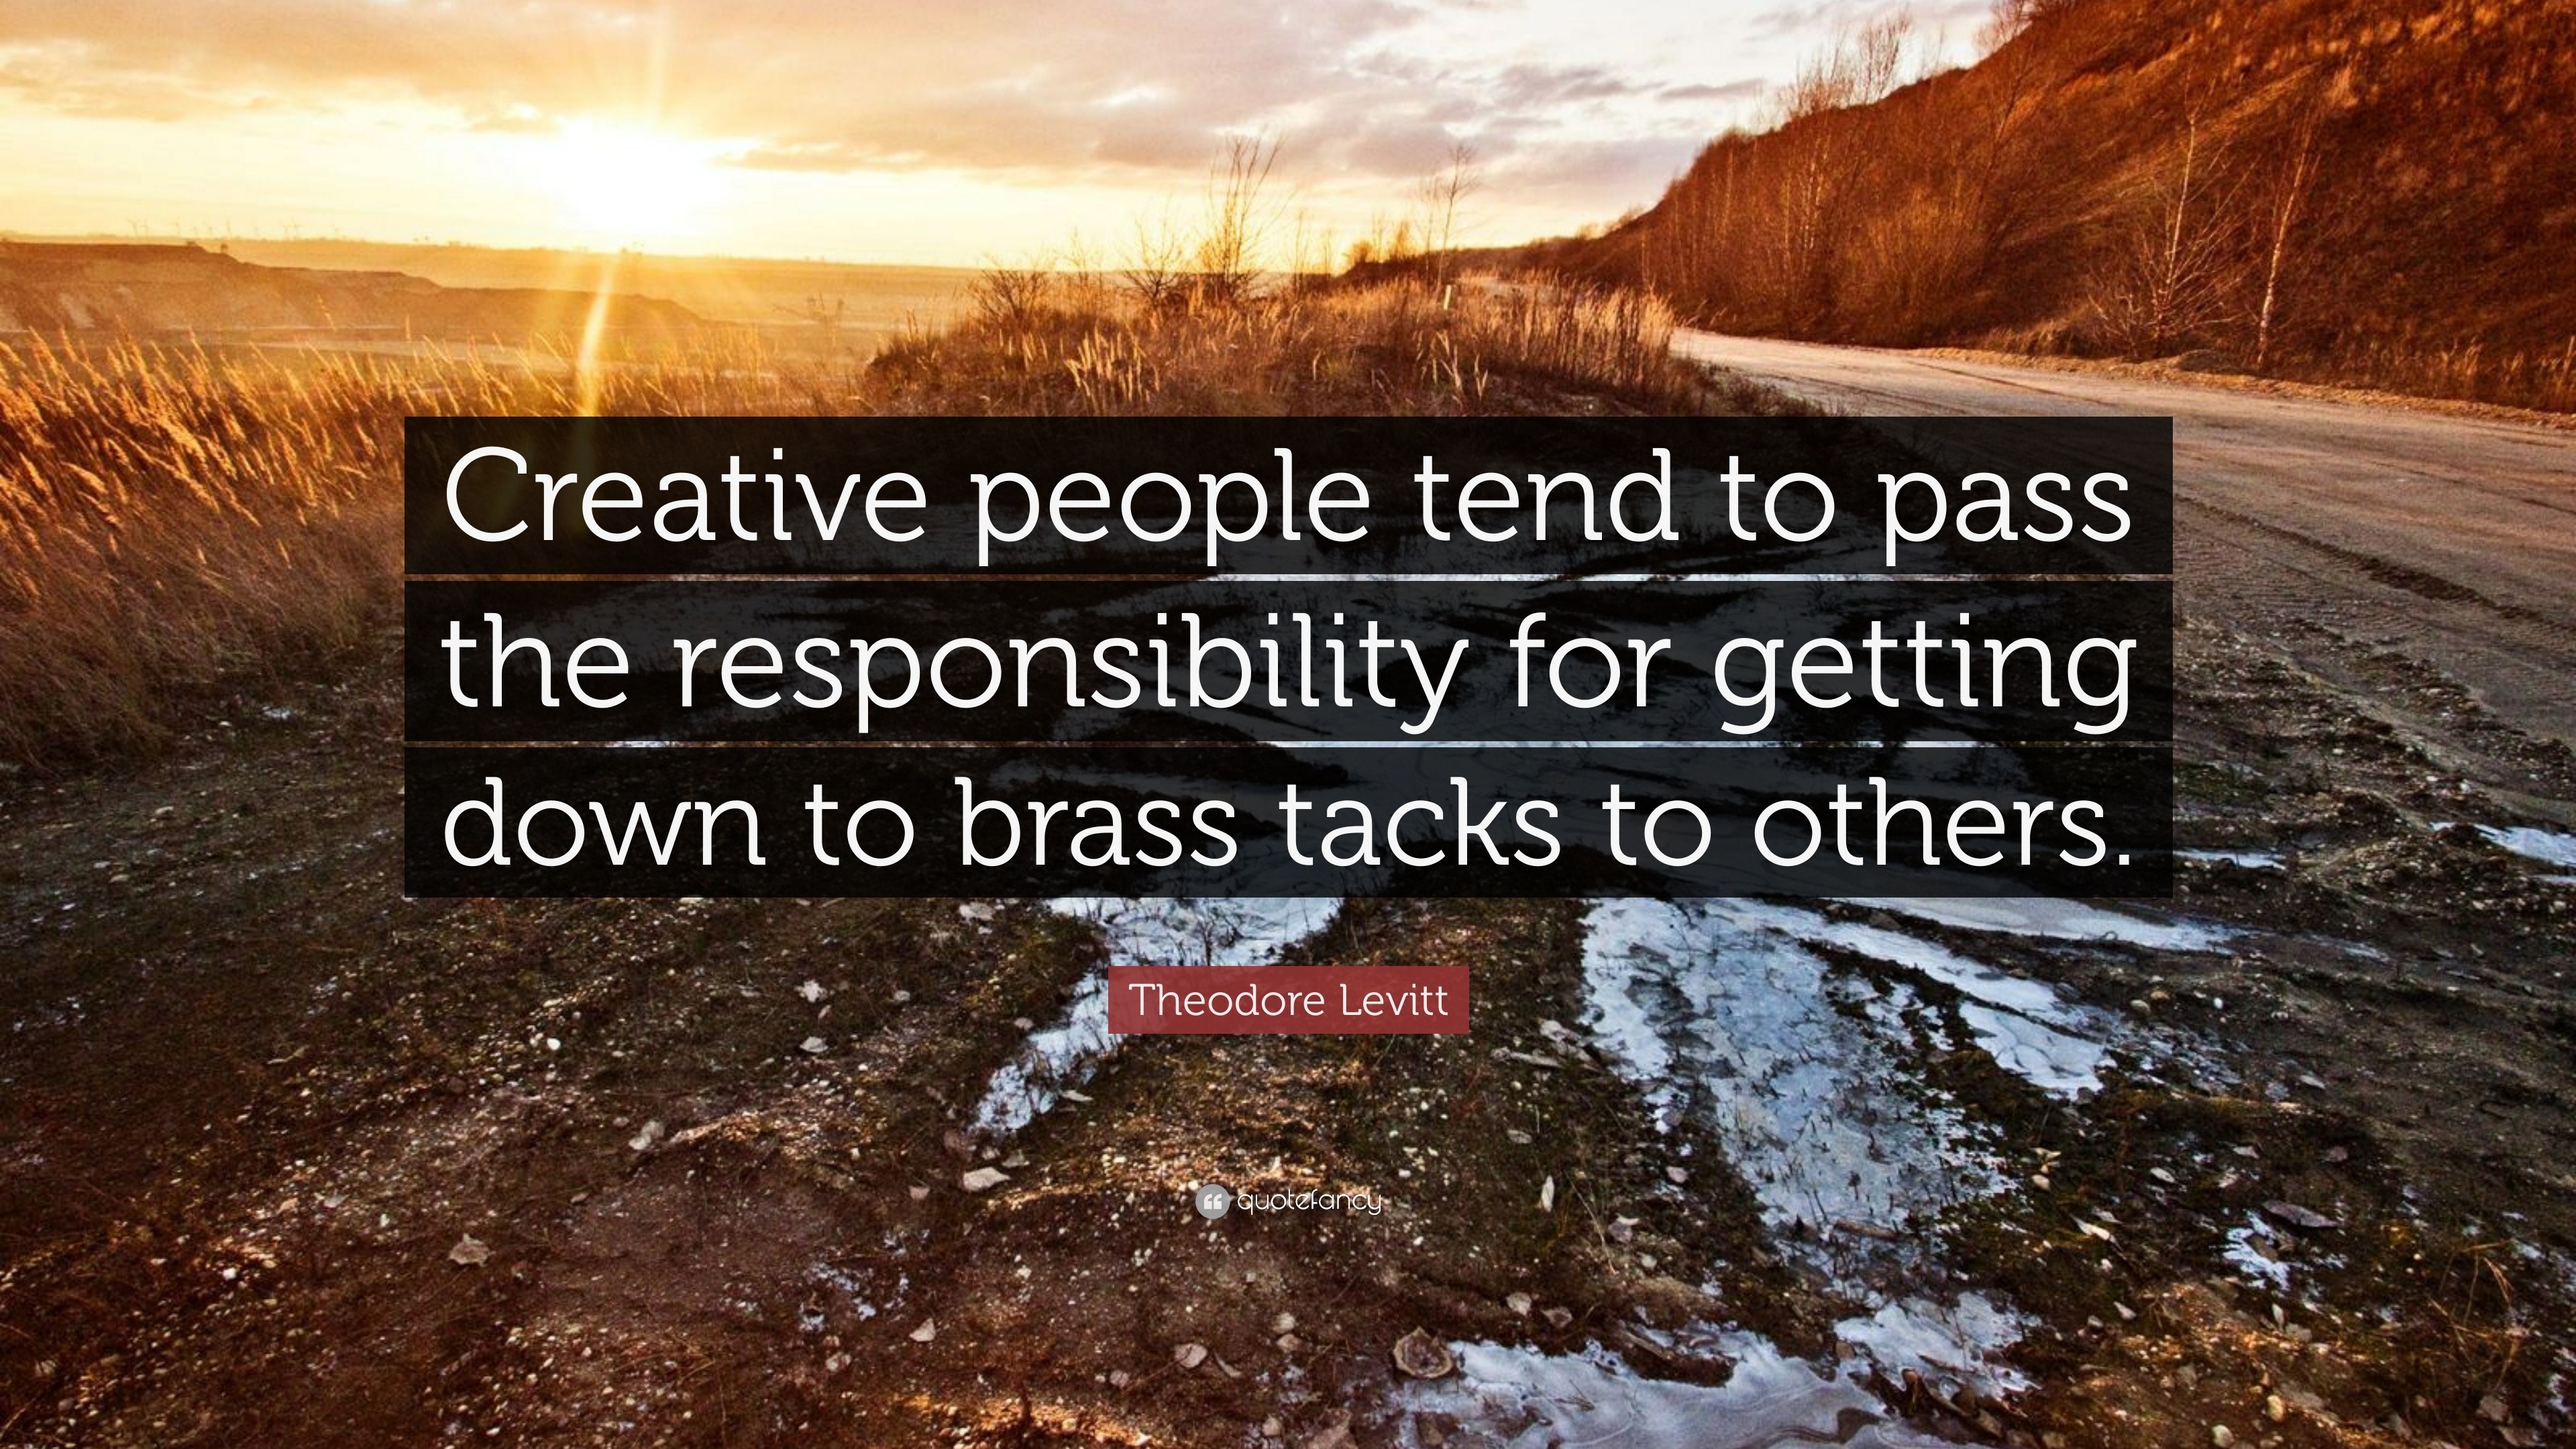 Theodore Levitt Quote: “Creative people tend to pass the responsibility for  getting down to brass tacks